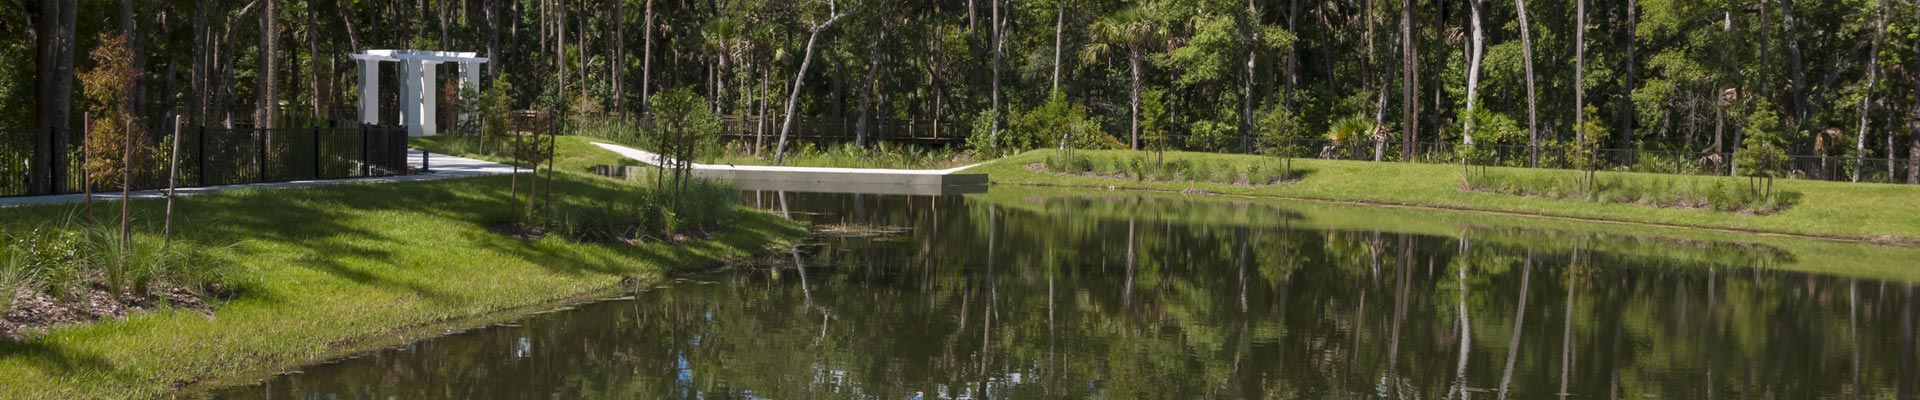 Our retention pond cleaning will make your pond look just as new.